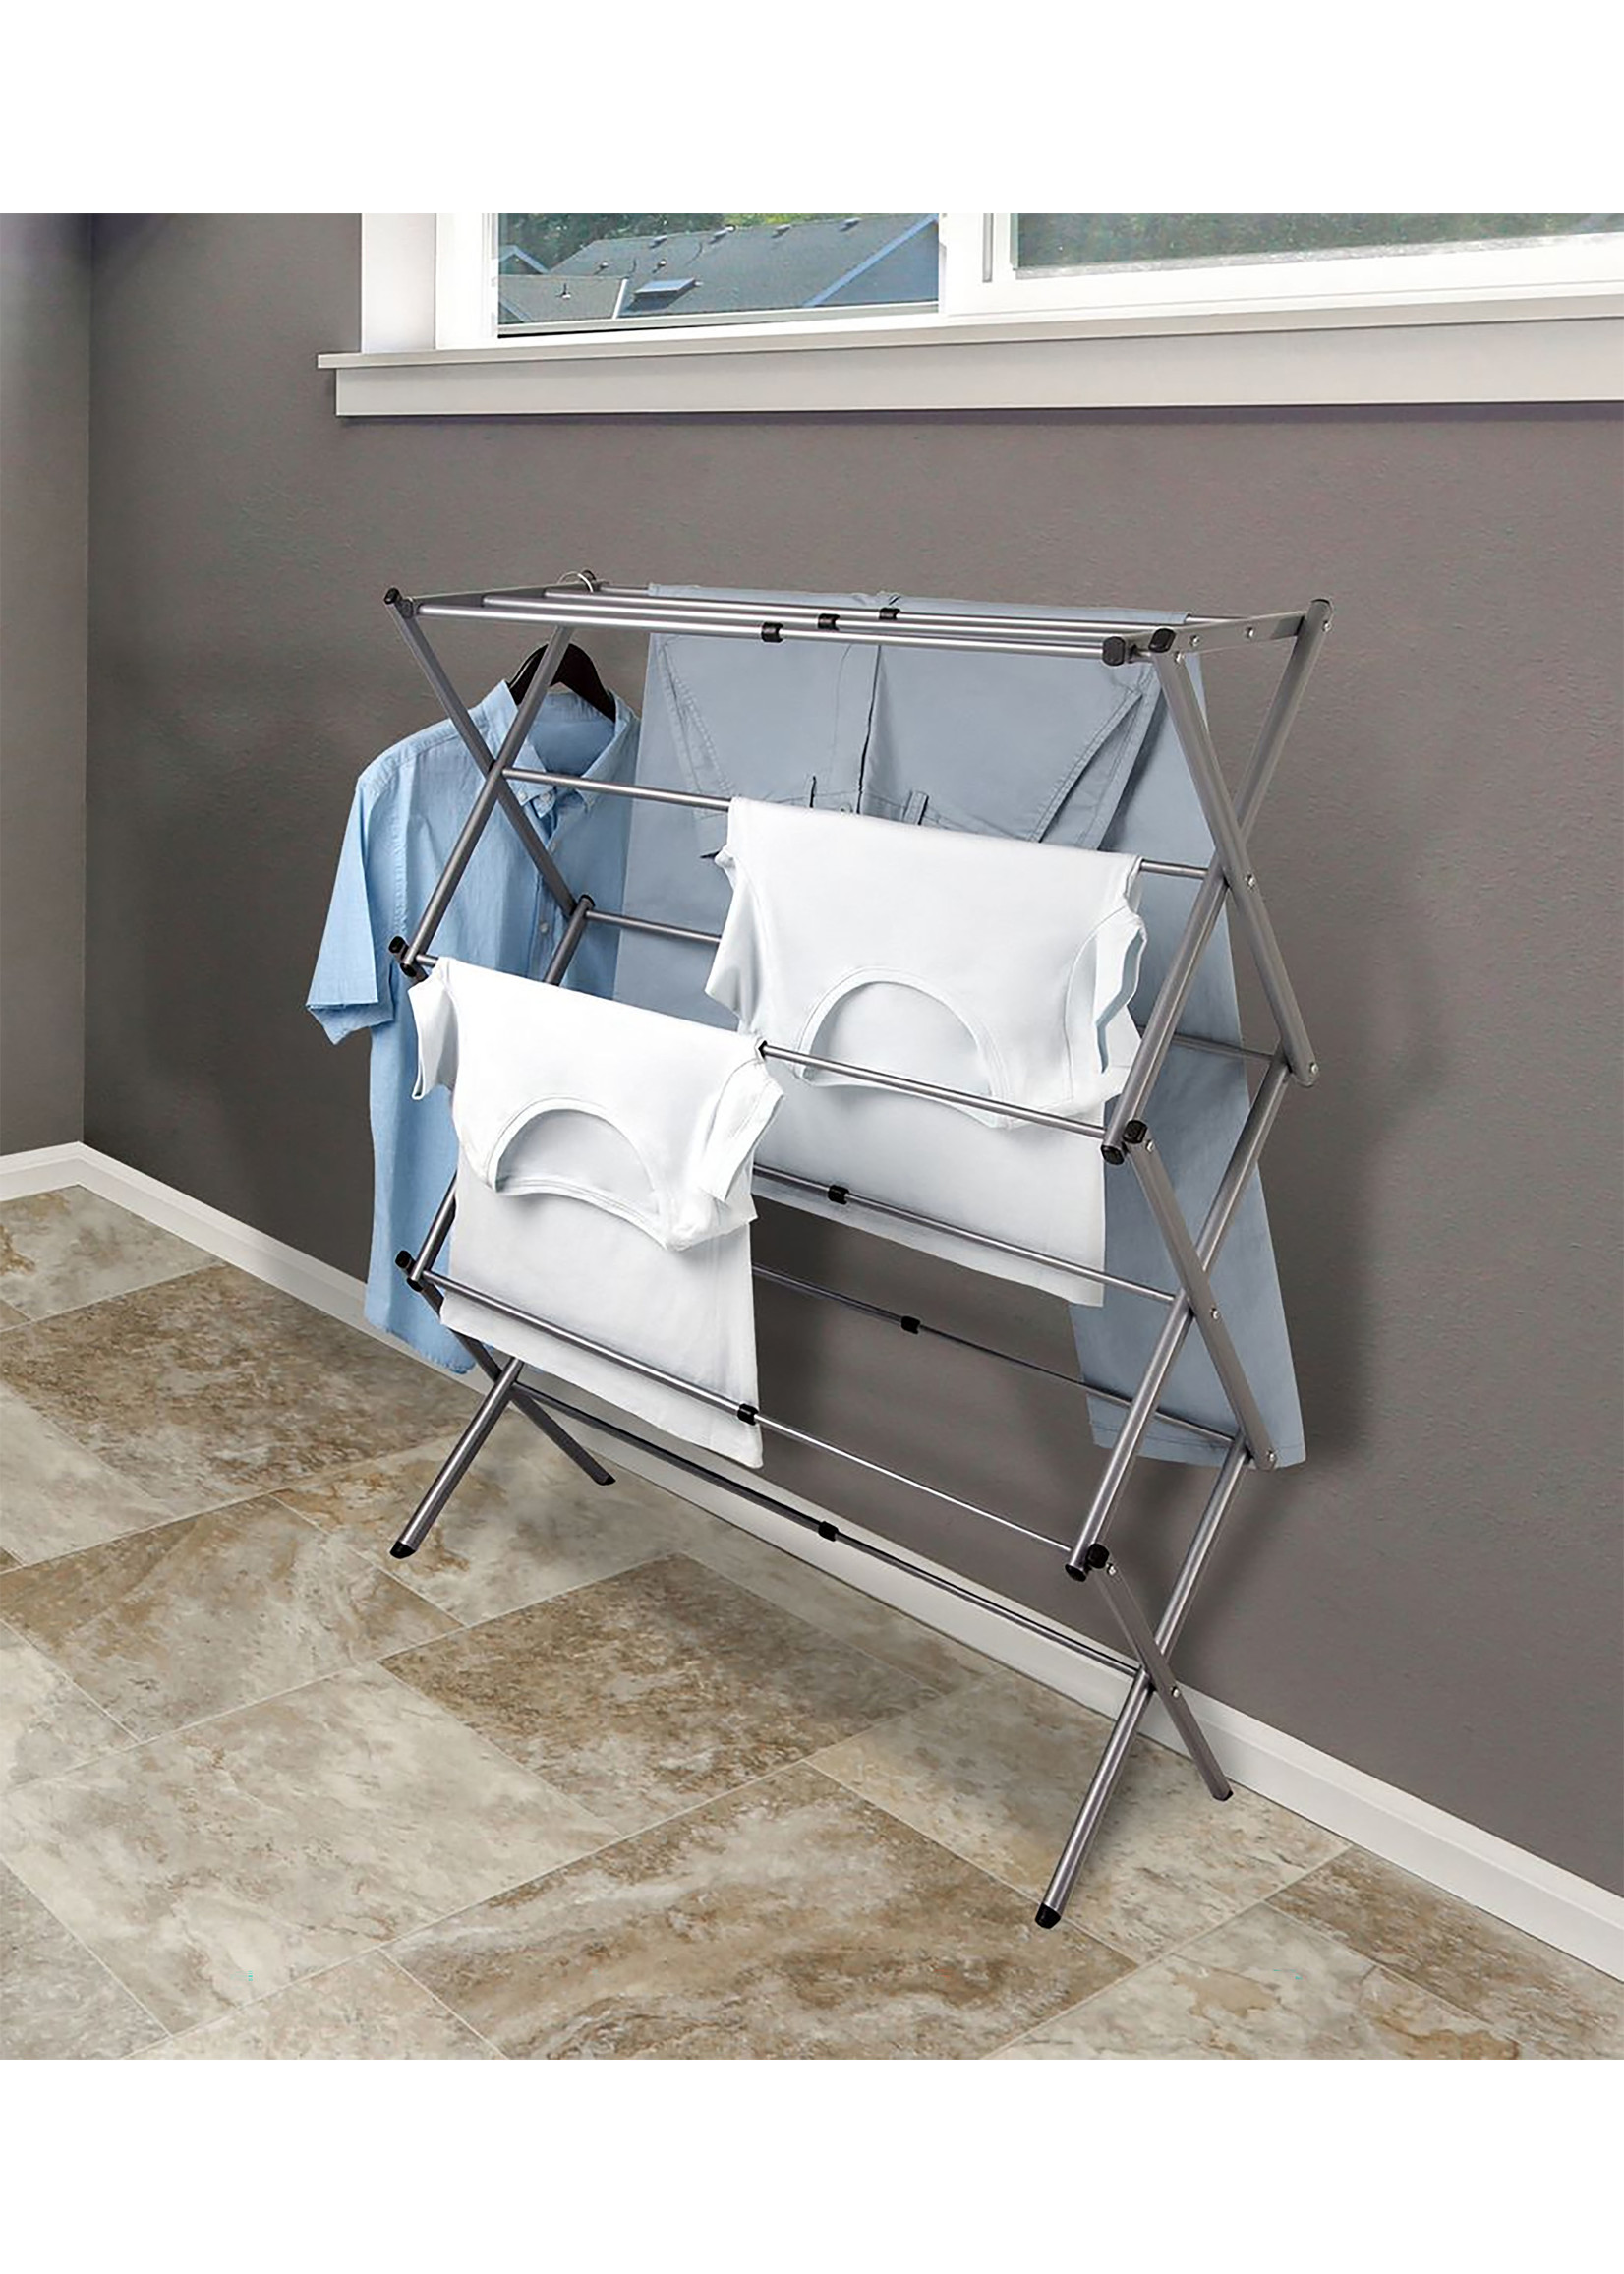 ITY INTERNATIONAL Small Folding Silver Vertical Clothes Dryer Rack